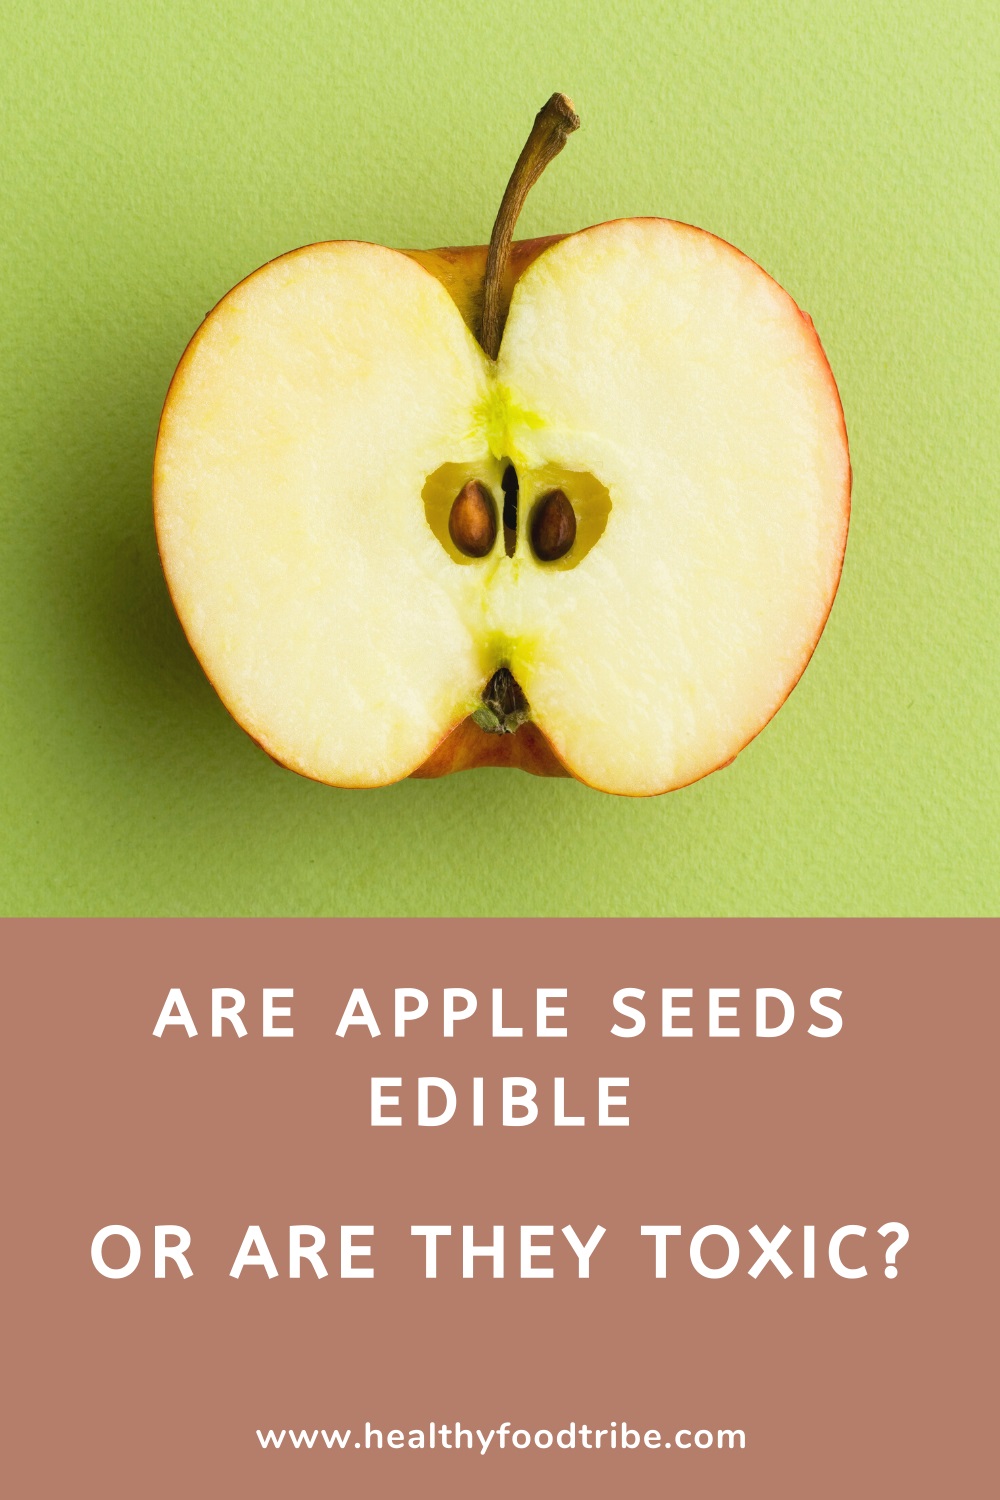 Are apple seeds edible?